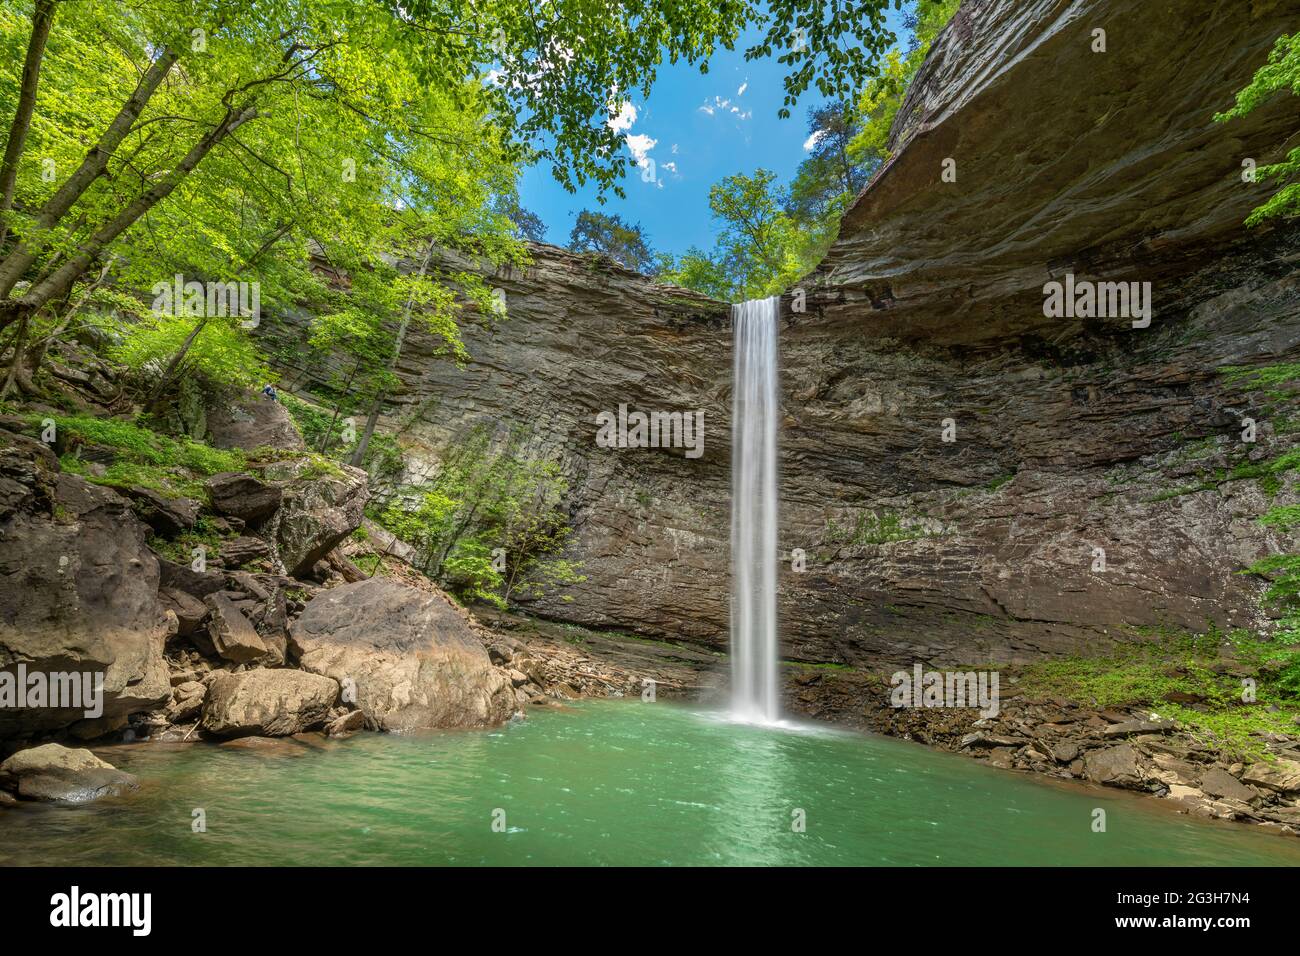 Beautiful Ozone Falls in Cumberland County Tennessee is a wonderful swimming hole with a cool, cascading waterfall feeding the pool. Stock Photo